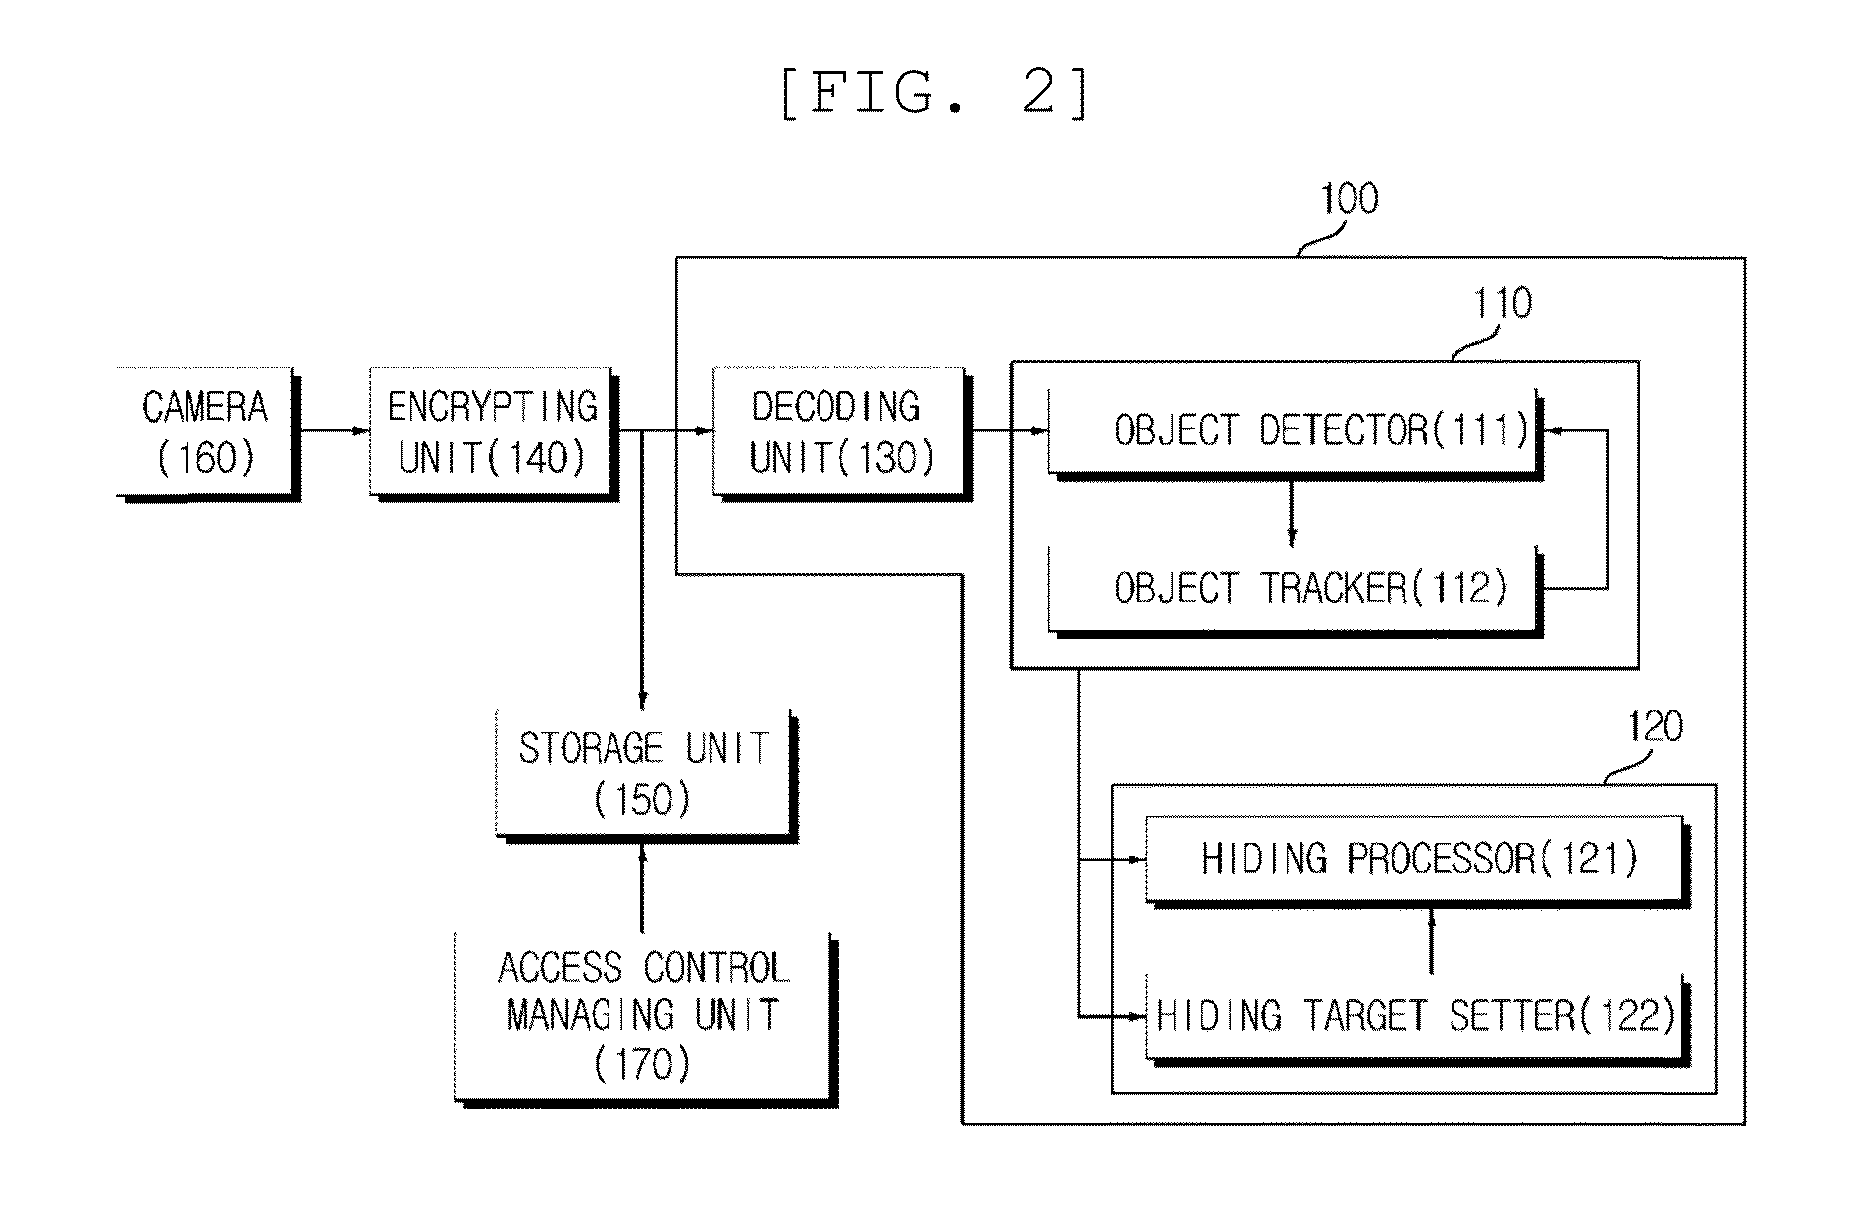 Apparatus and method for masking privacy region based on monitored video image